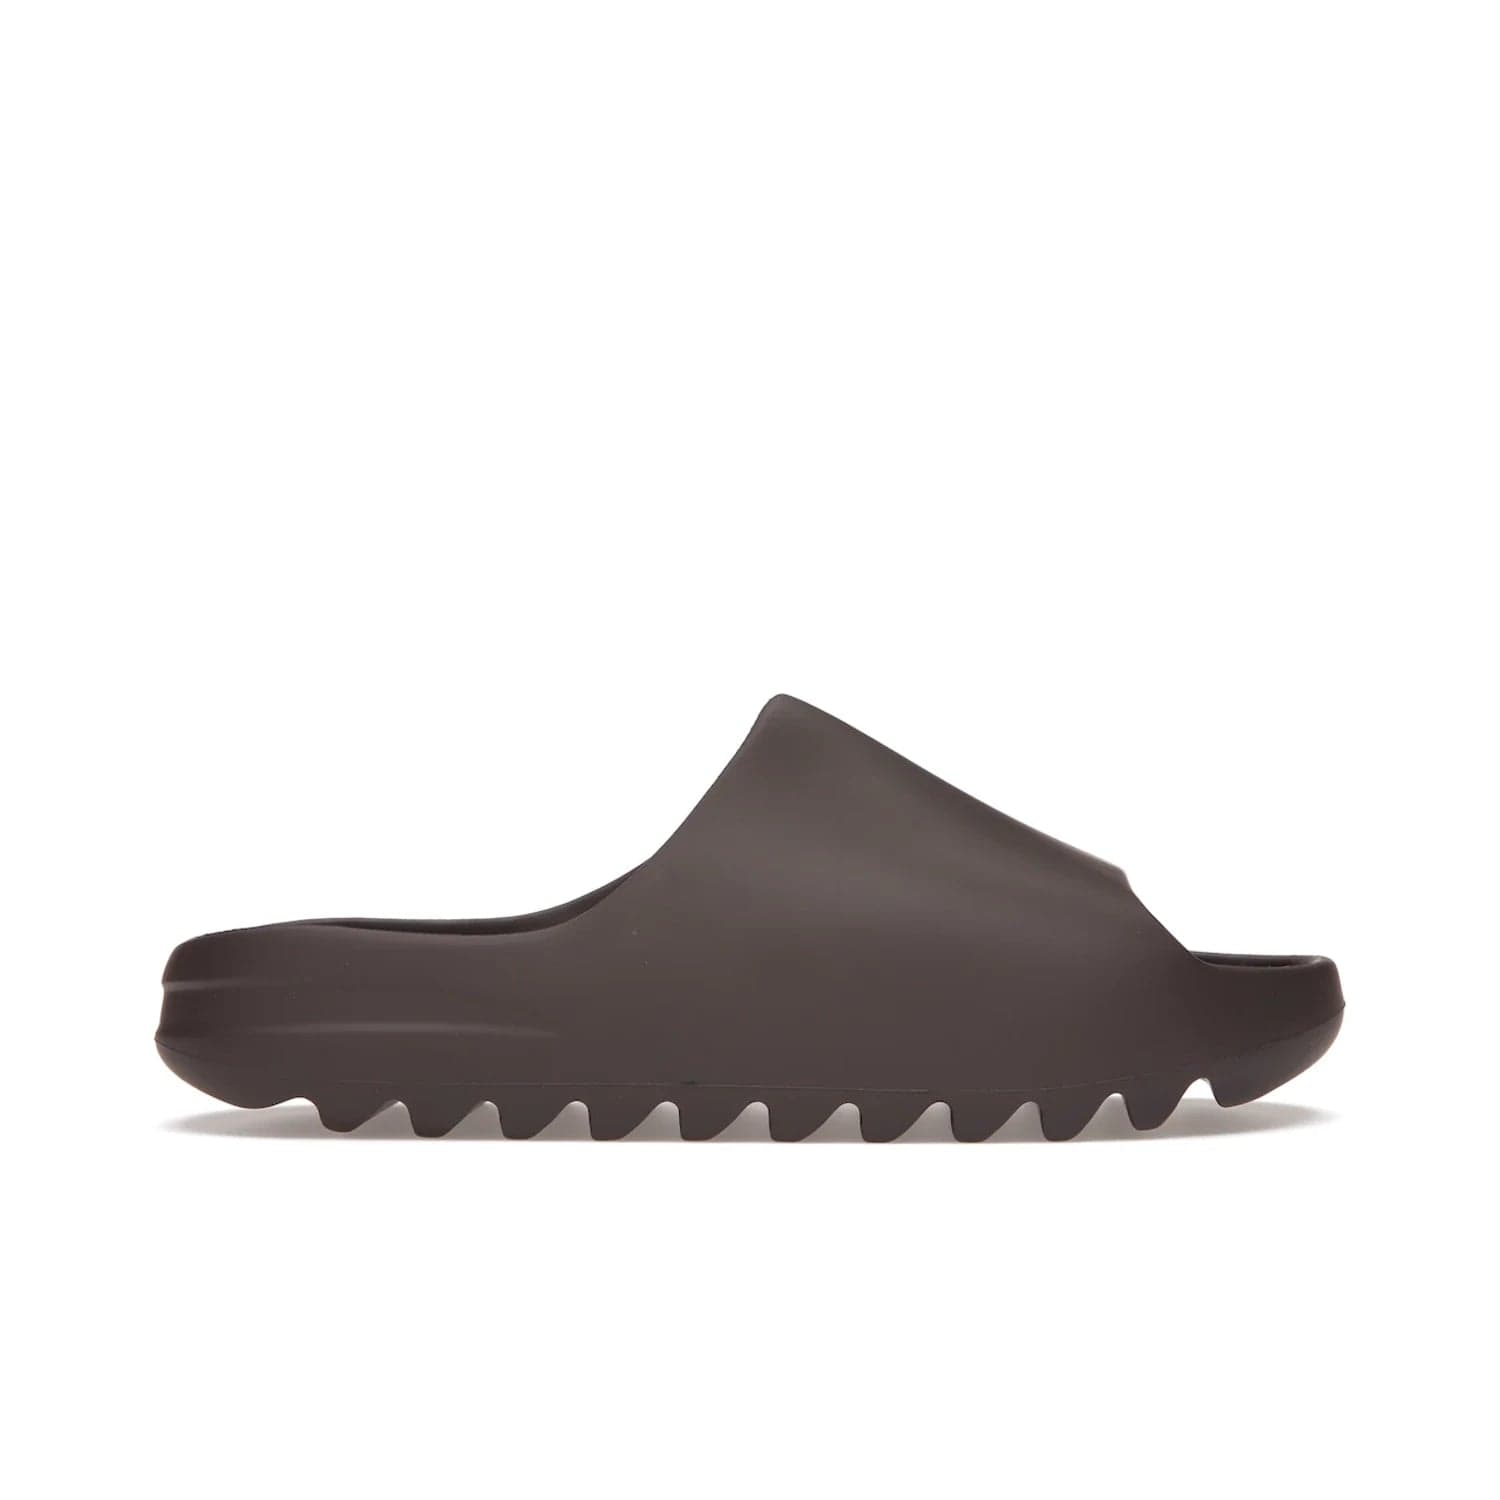 adidas Yeezy Slide Soot - Image 1 - Only at www.BallersClubKickz.com - Shop the Yeezy Slide Soot sneaker by Adidas, a sleek blend of form and function. Monochrome silhouette in Soot/Soot/Soot. Lightweight EVA foam offers comfort and durability. Get the must-have style today.